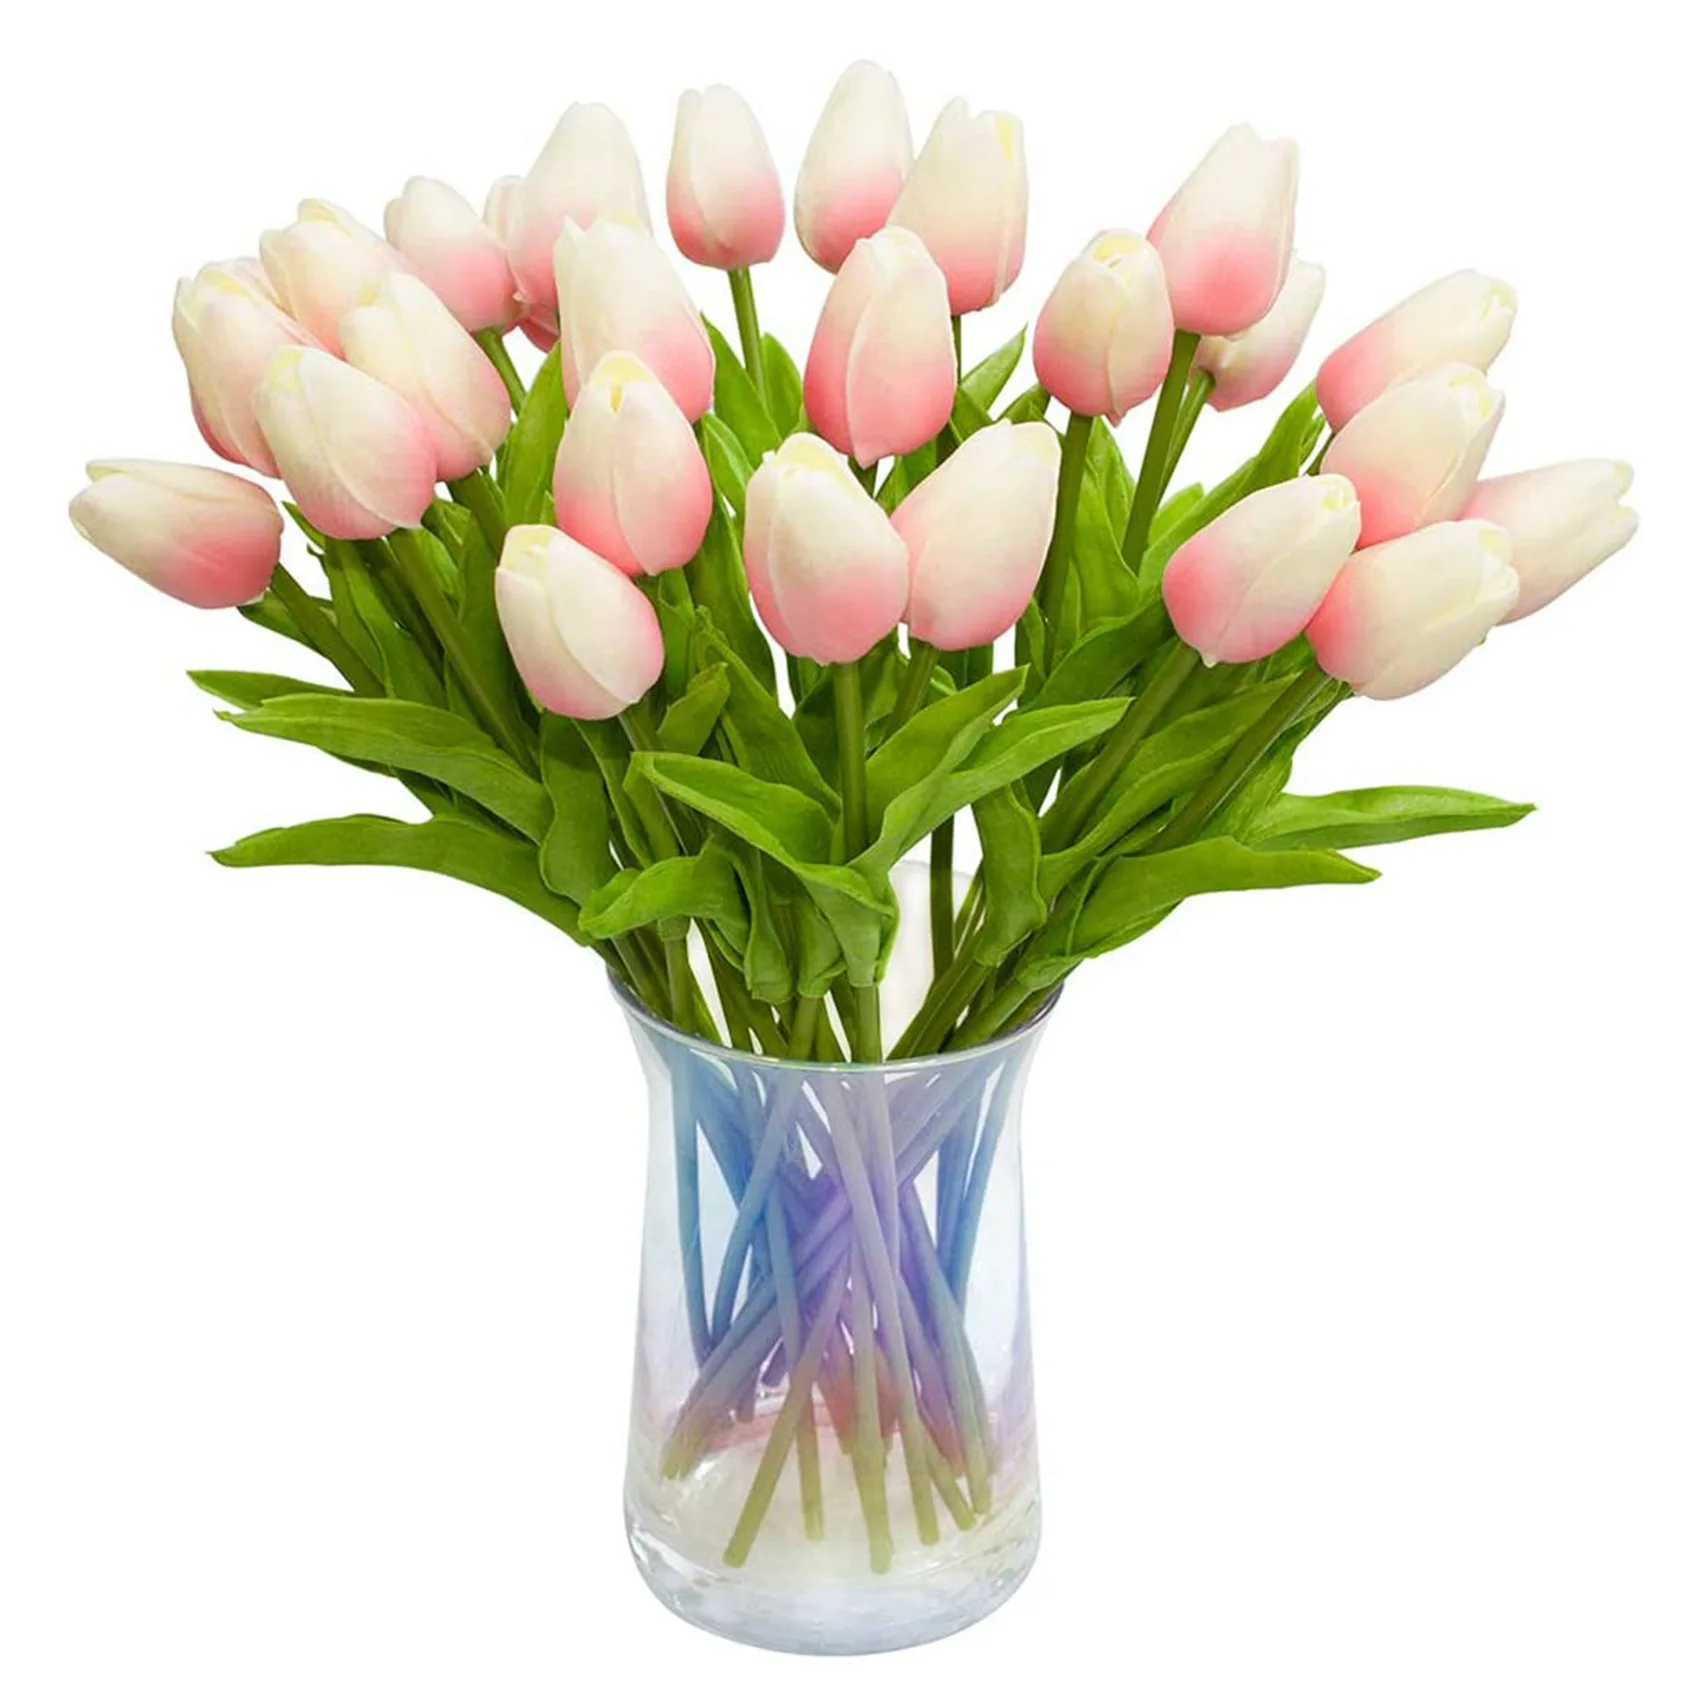 

30Pcs Artificial Tulips Flowers Real Touch Tulips Fake Holland PU Tulip Bouquet Latex Flower White Tulip(Light Pink)